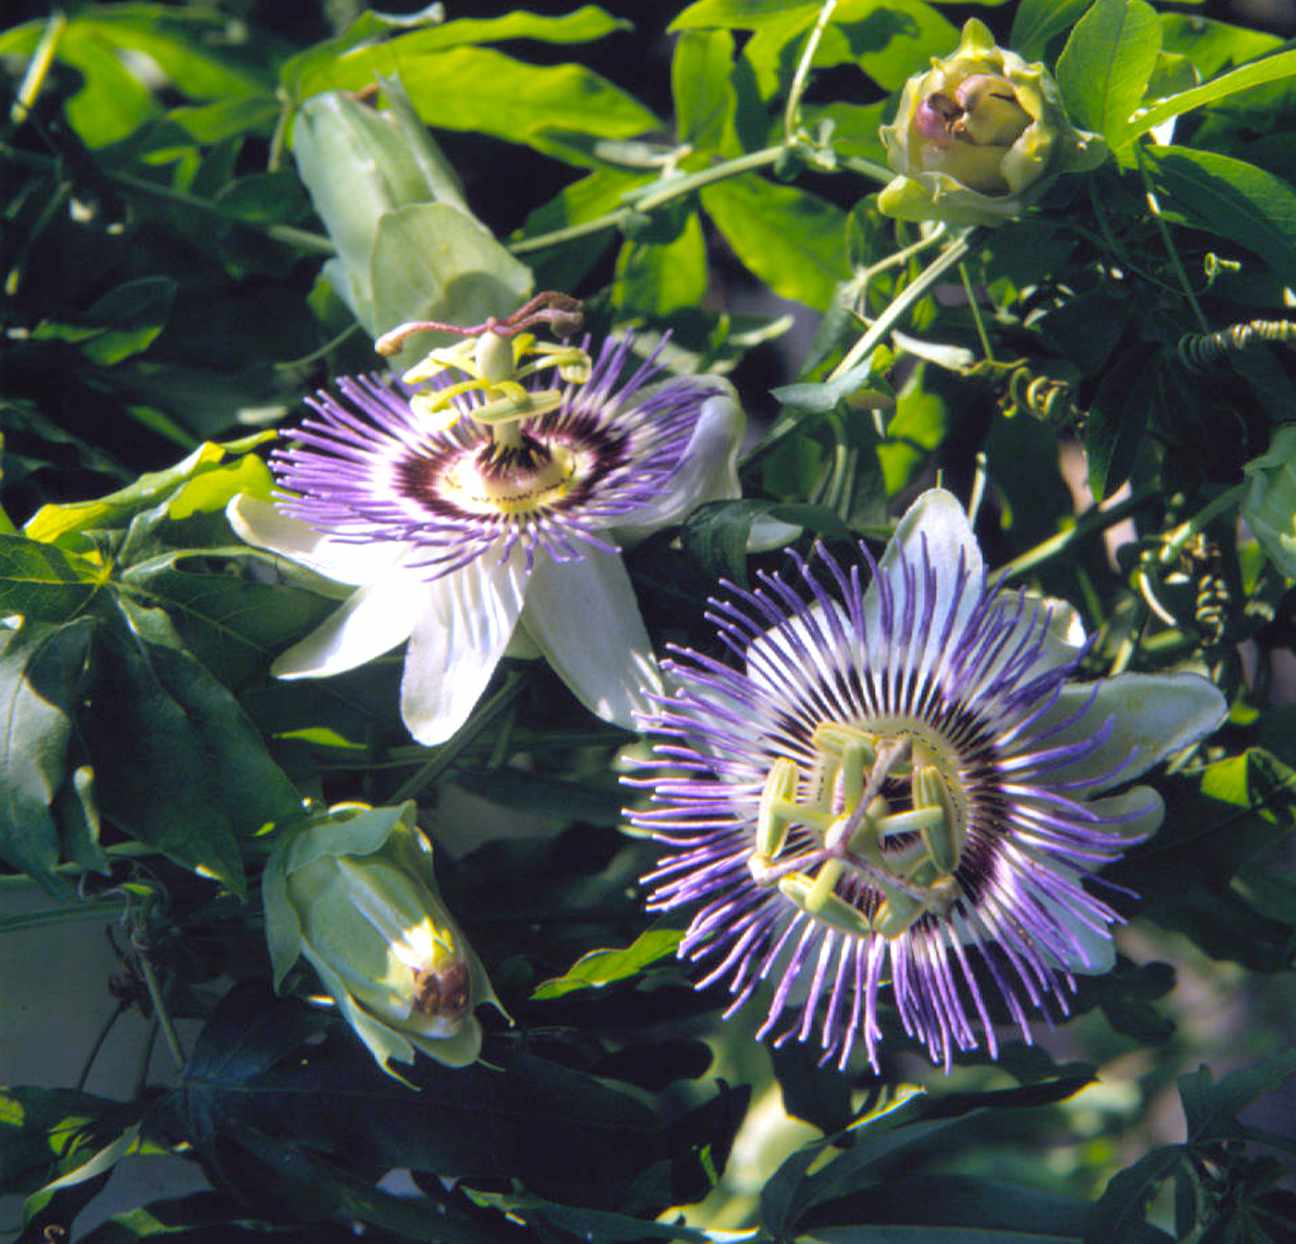 Blue passionflower